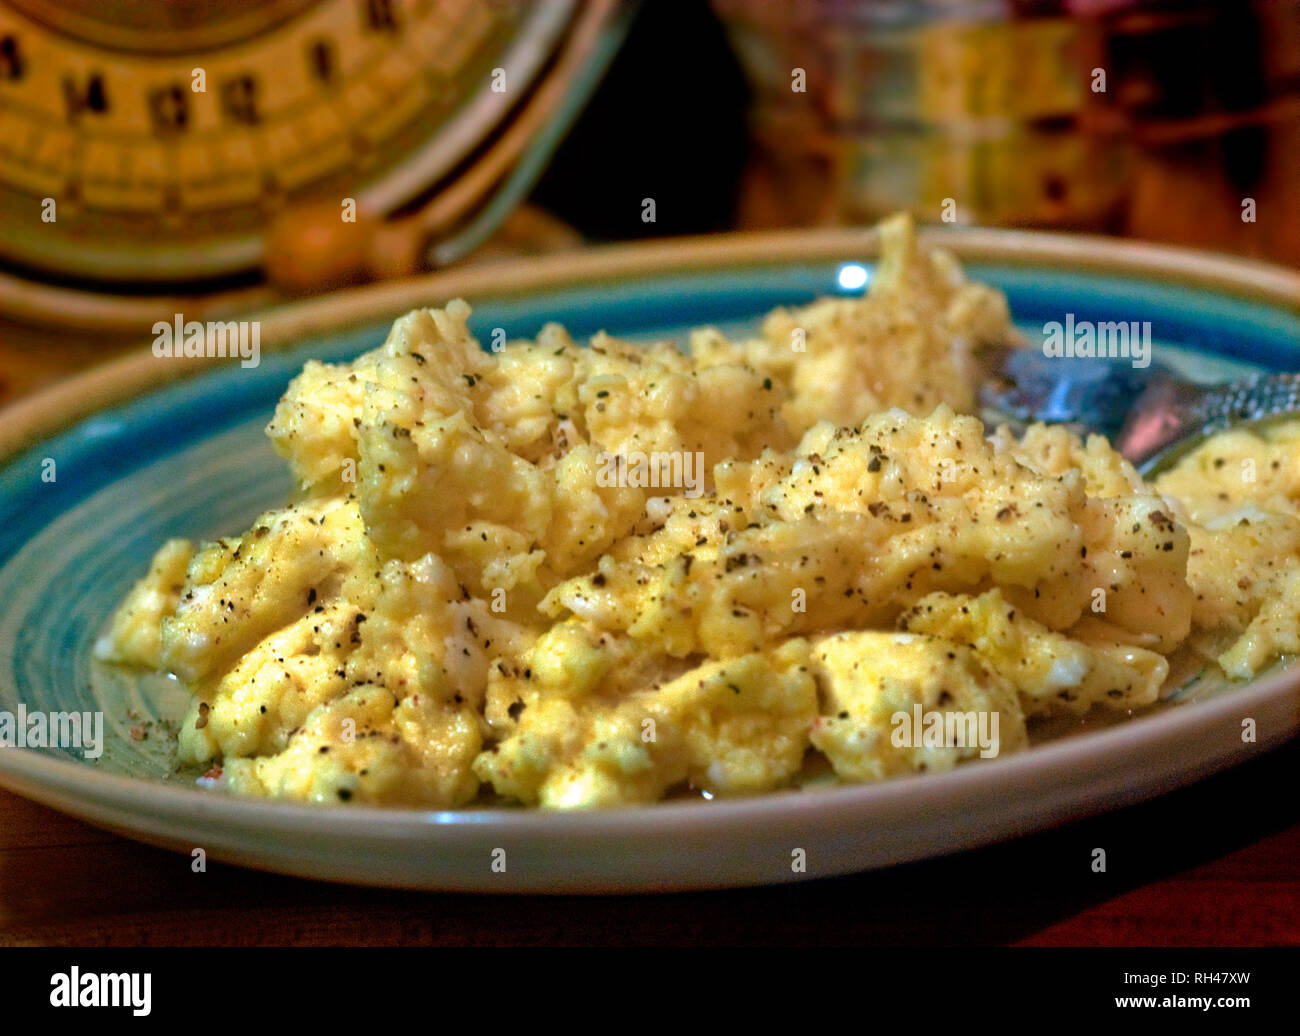 Scrambled eggs, seasoned with salt and pepper, are pictured on a plate beside an antique scale. Stock Photo